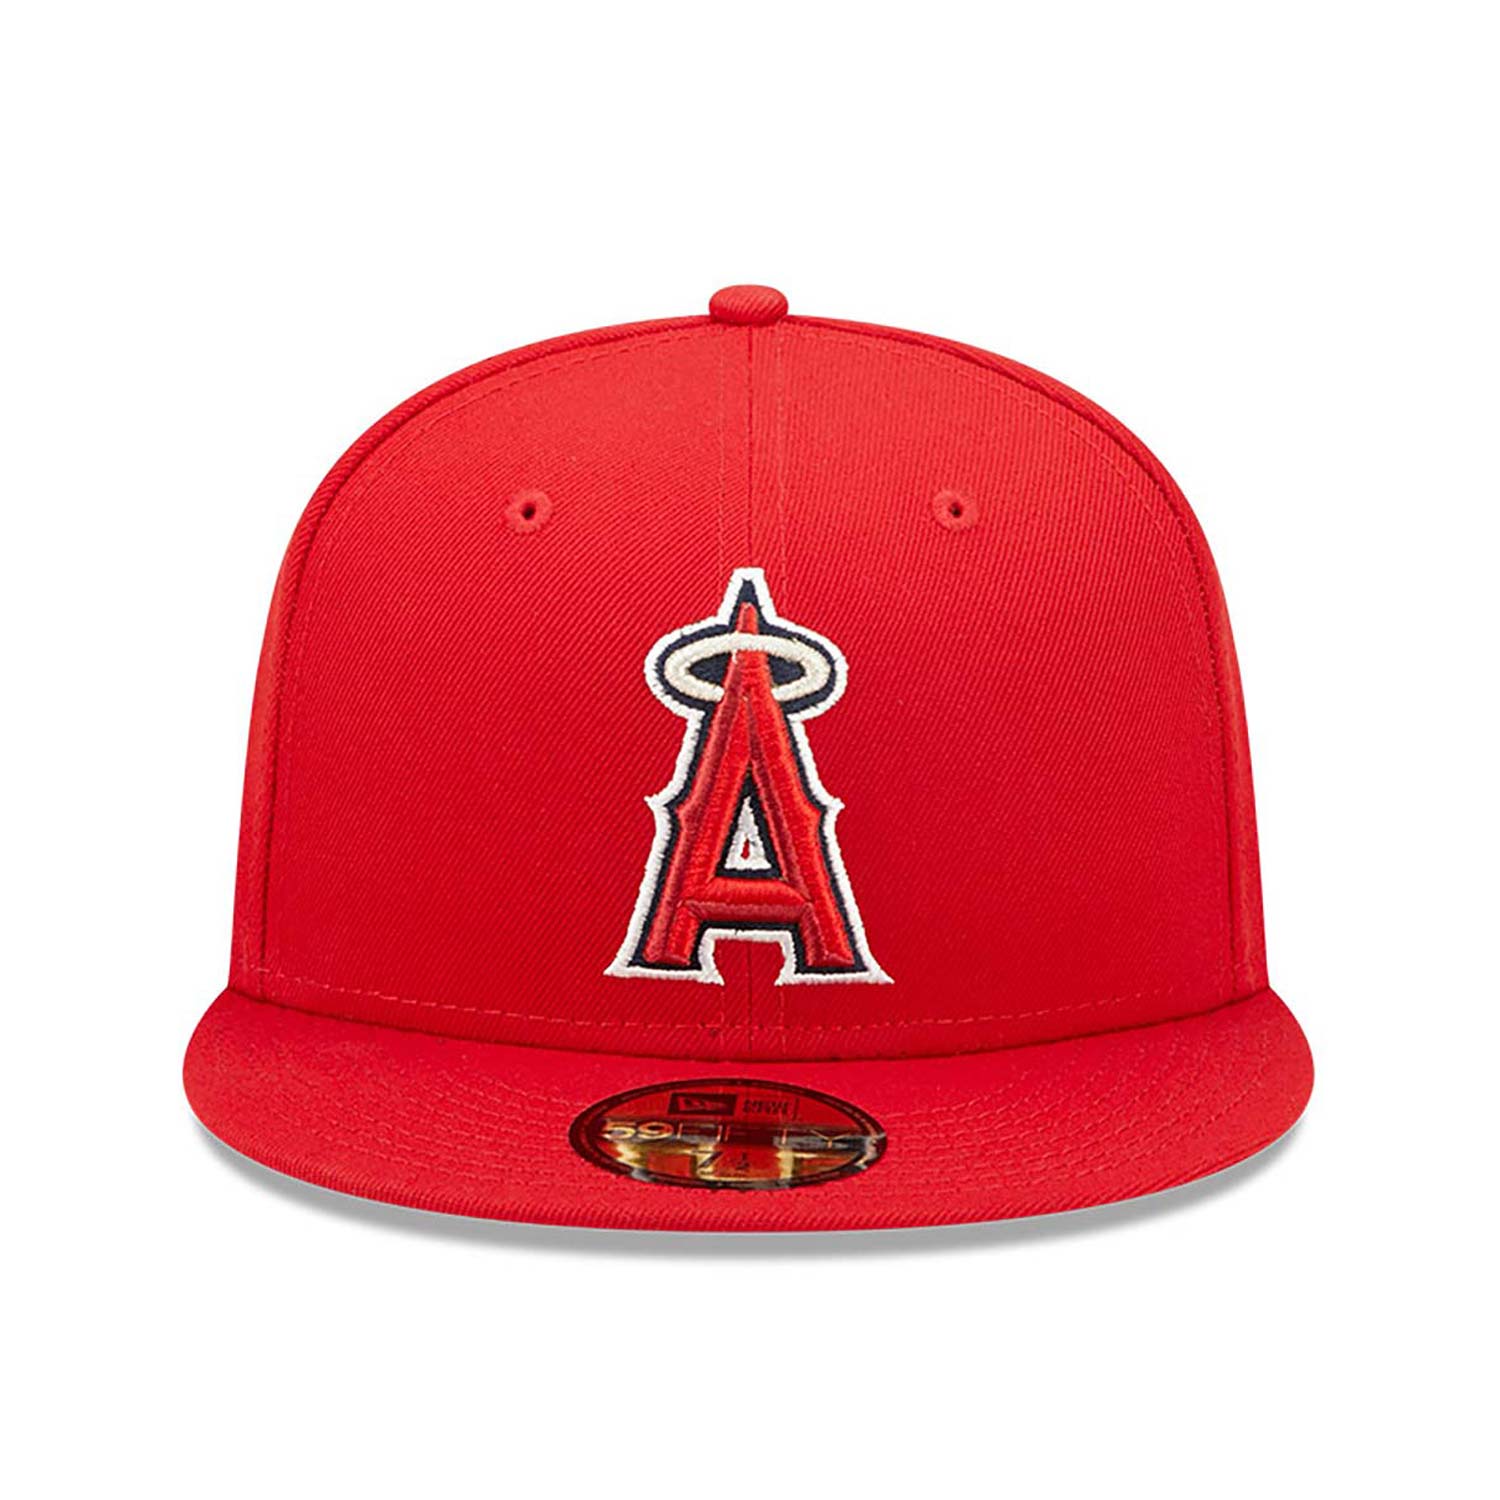 LA Angels Authentic On Field Red 59FIFTY Cap